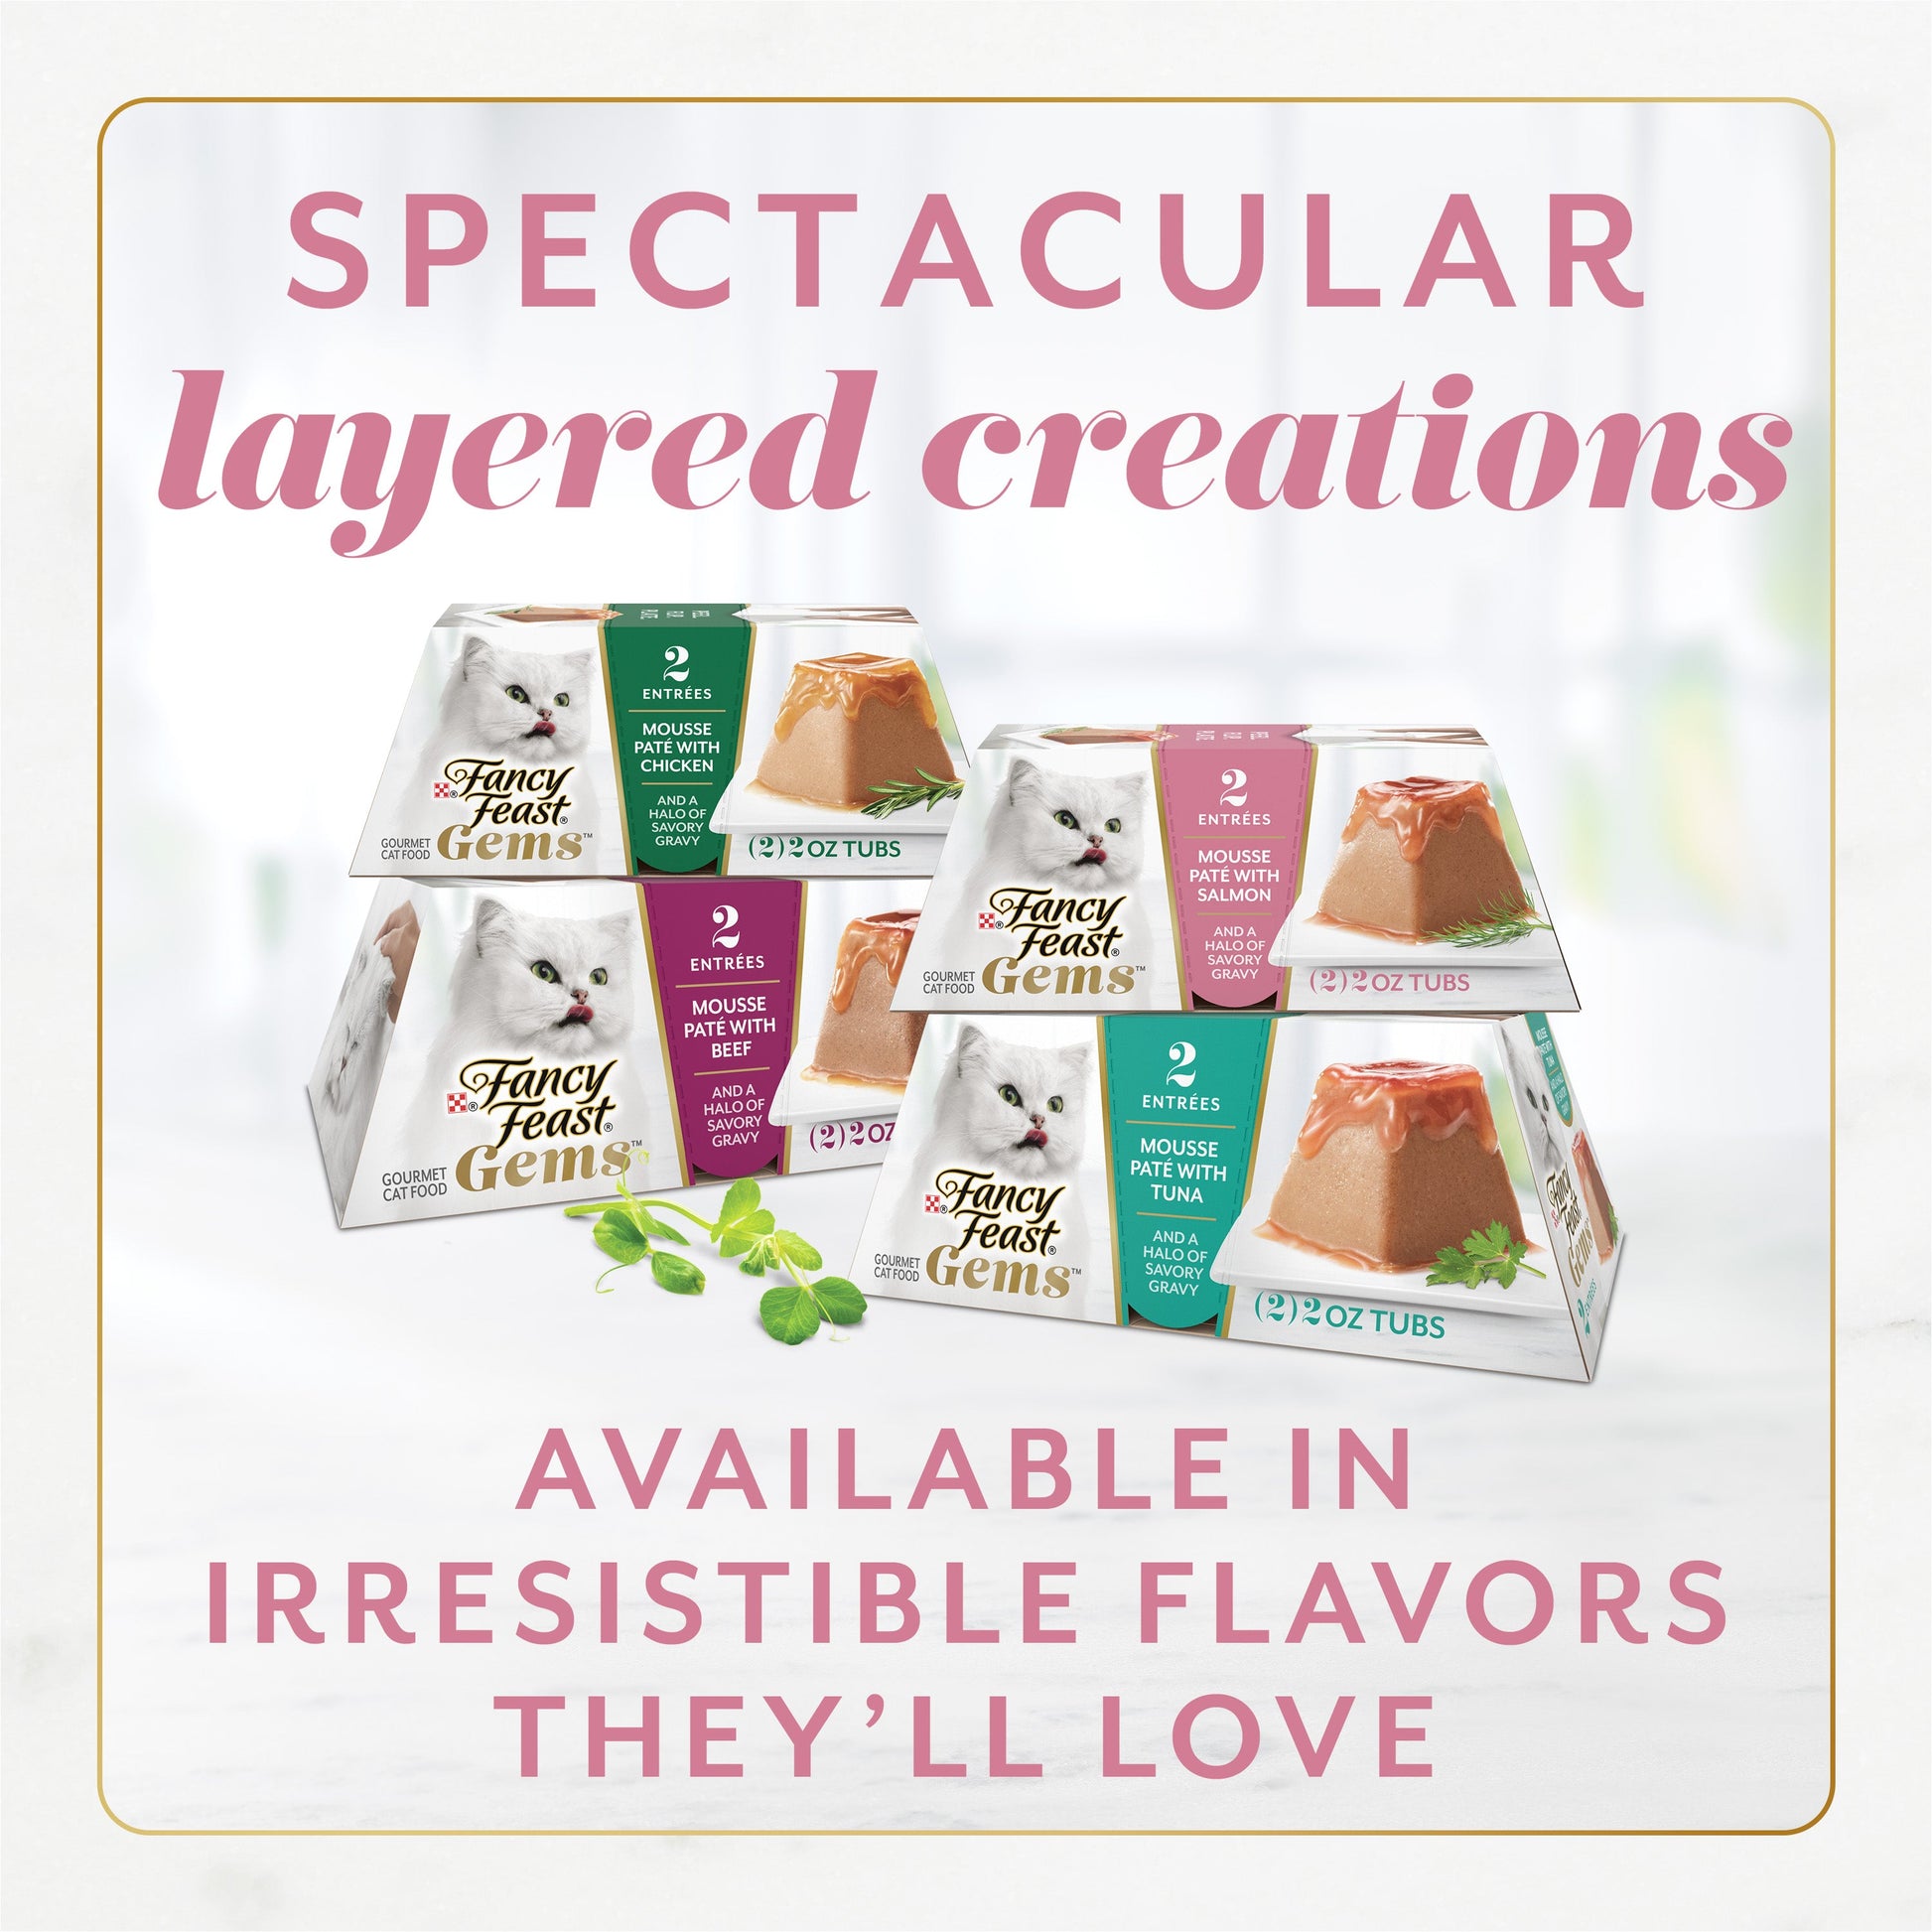 Spectacular layered creations, available in irresistible flavors they'll love